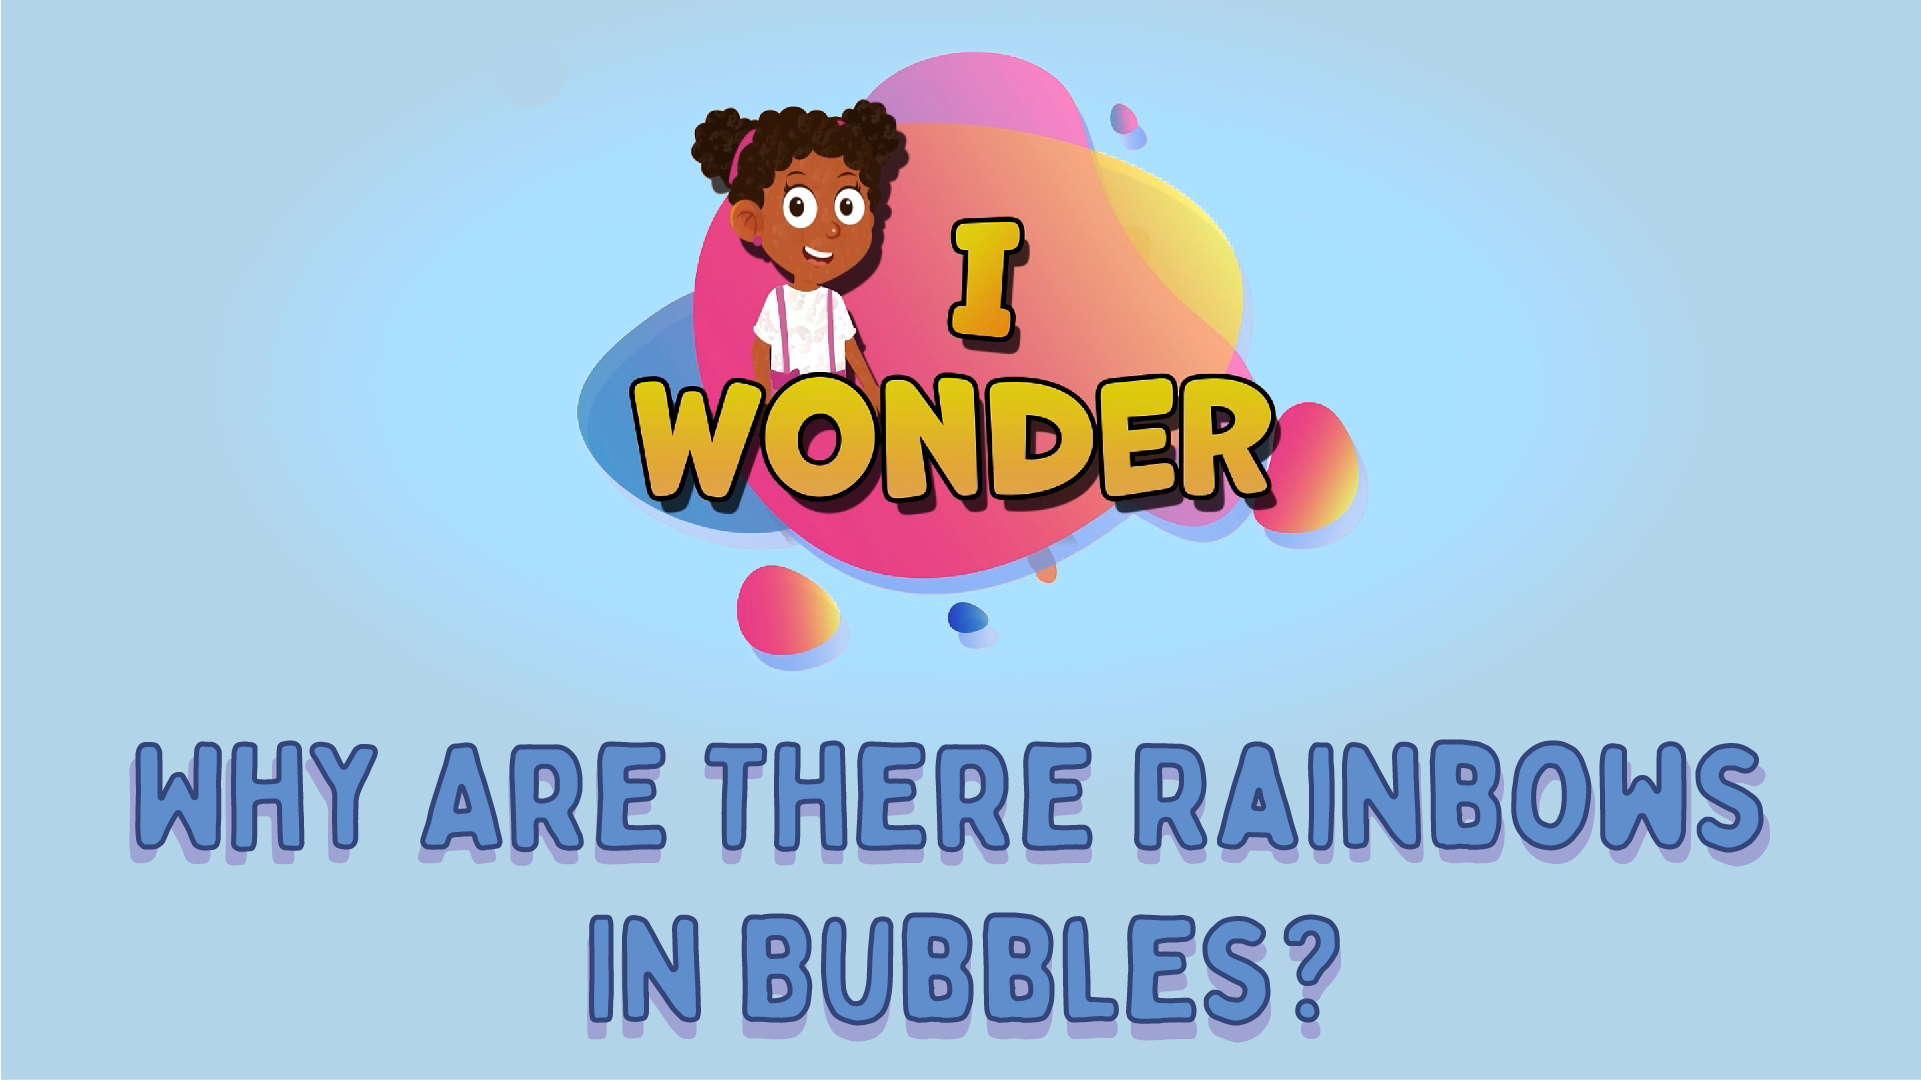 Why Are There Rainbows In Bubbles?